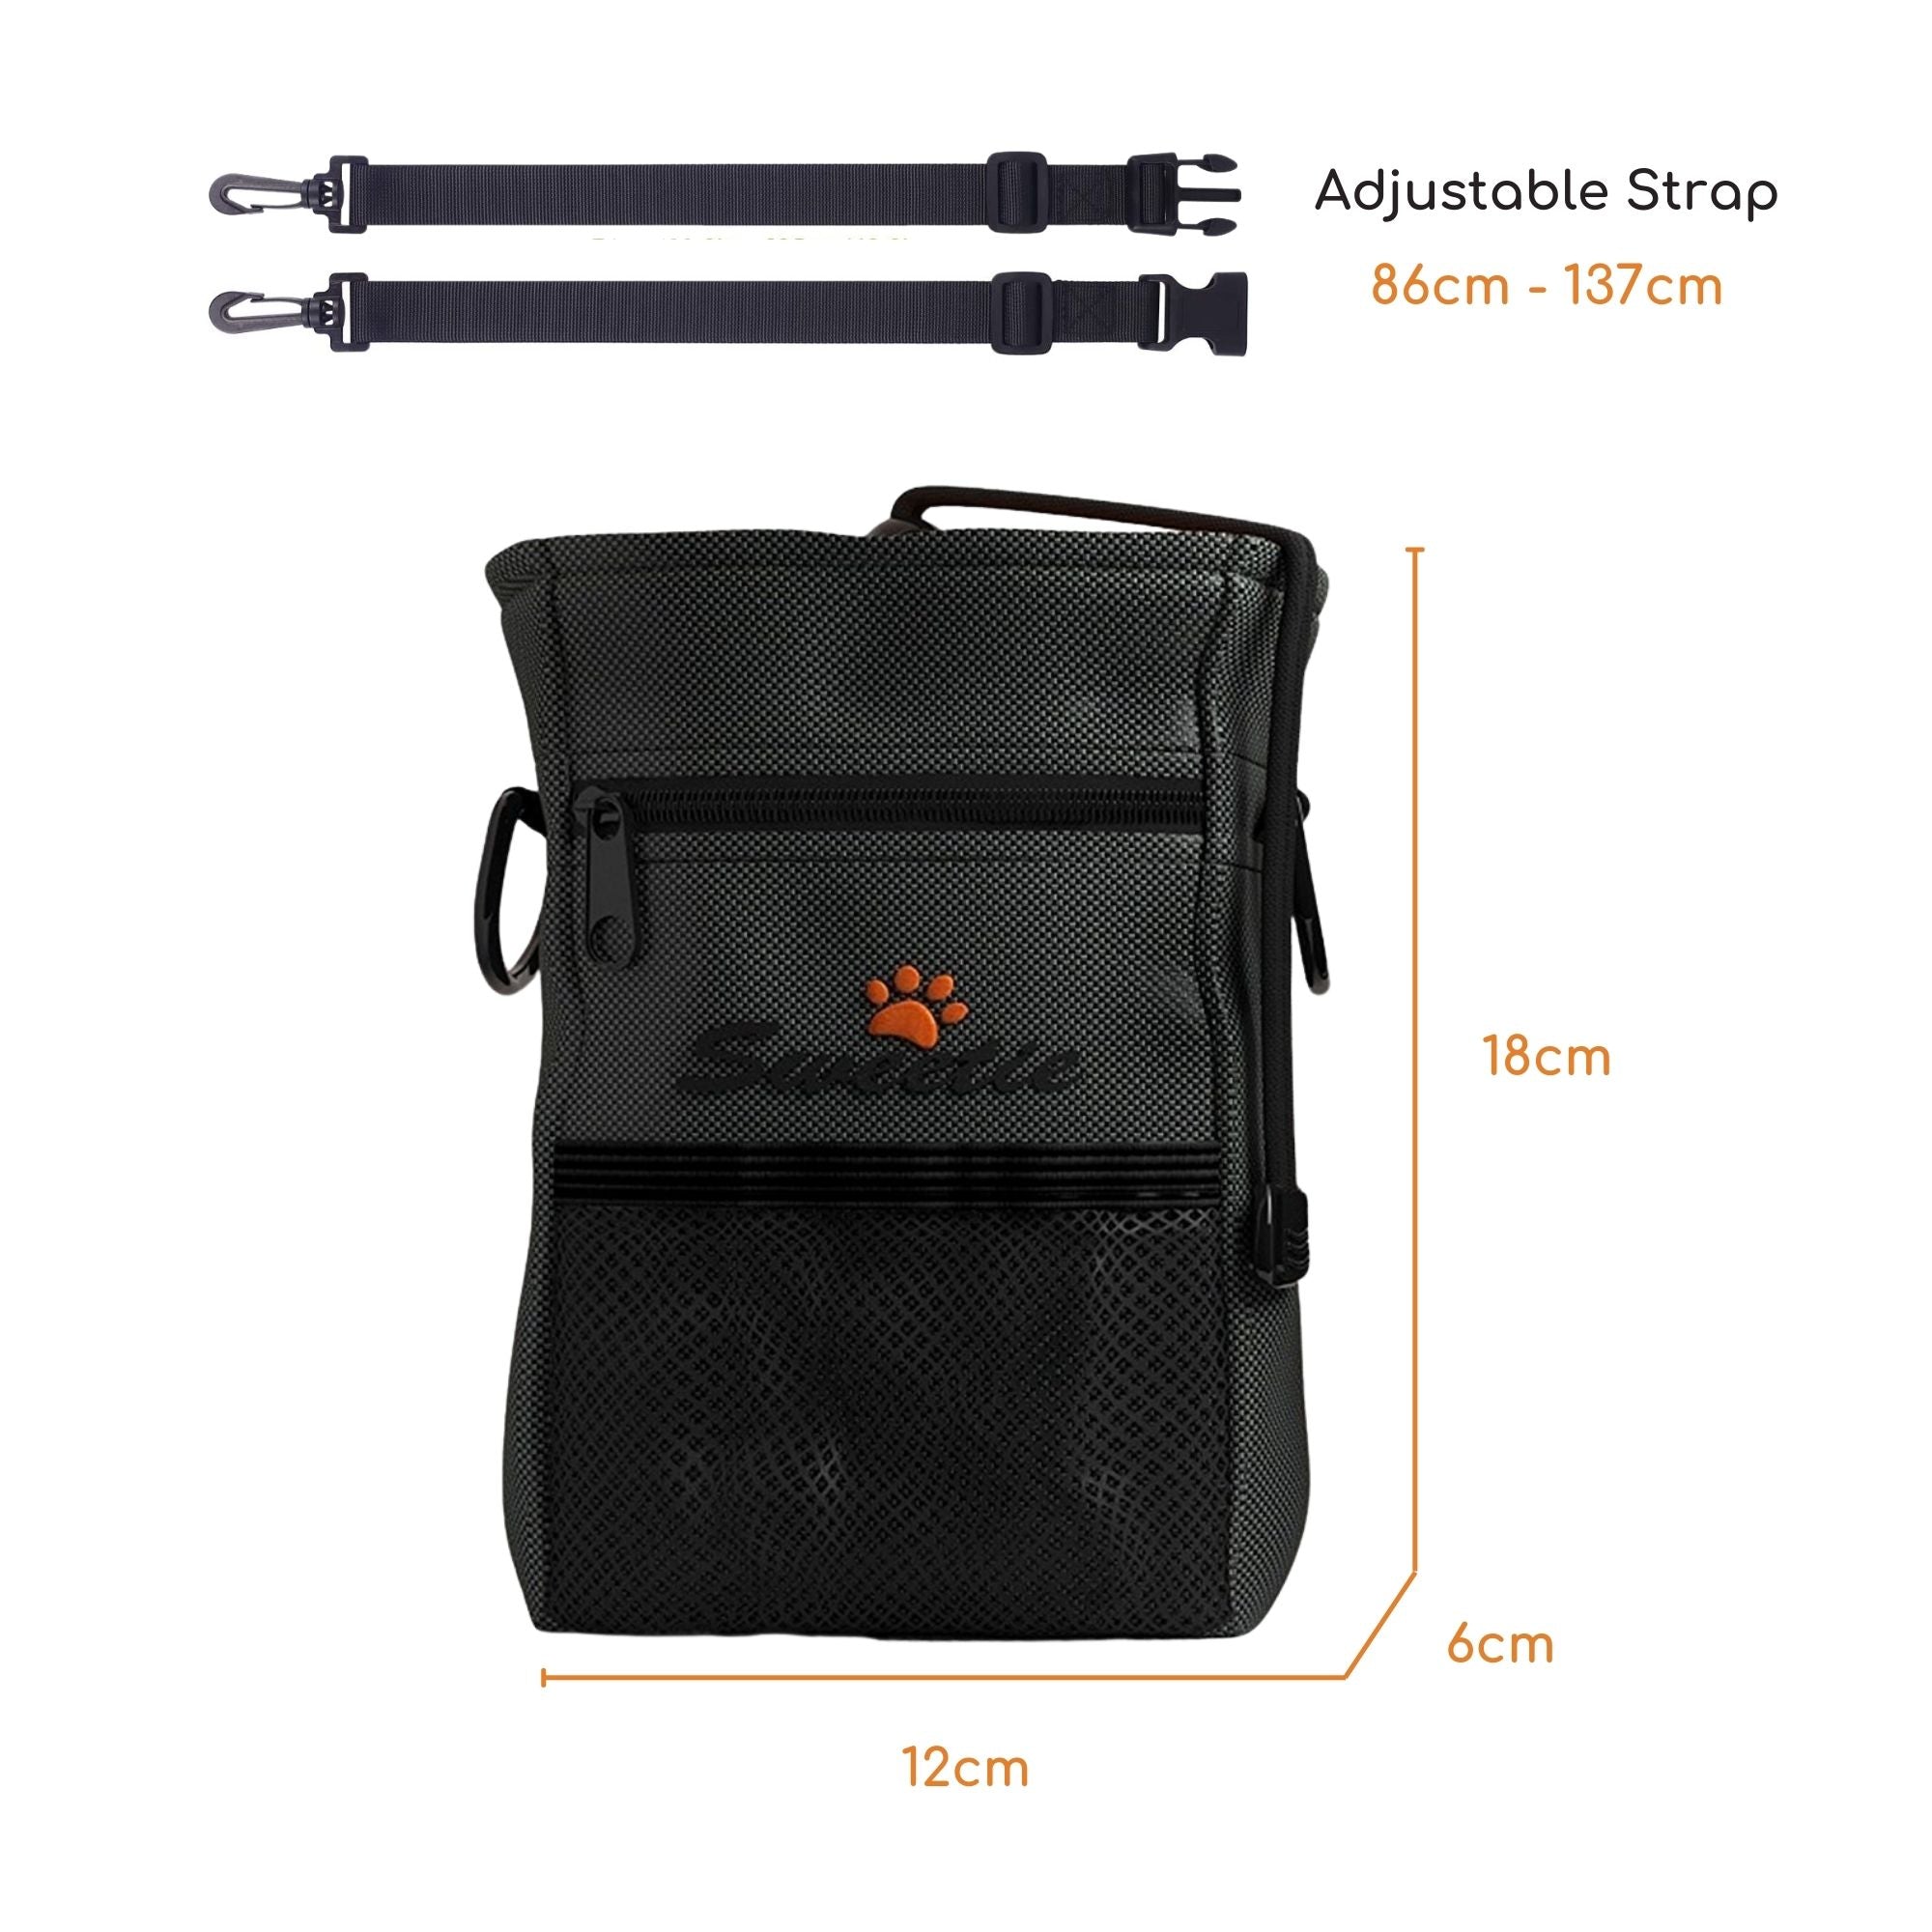 Premium Dog Treat Pouch Bag for Walking & Training, with Poop Bag Holder, Collapsible Bowl & Free Clicker - Perfect Puppy Kit - Sweetie